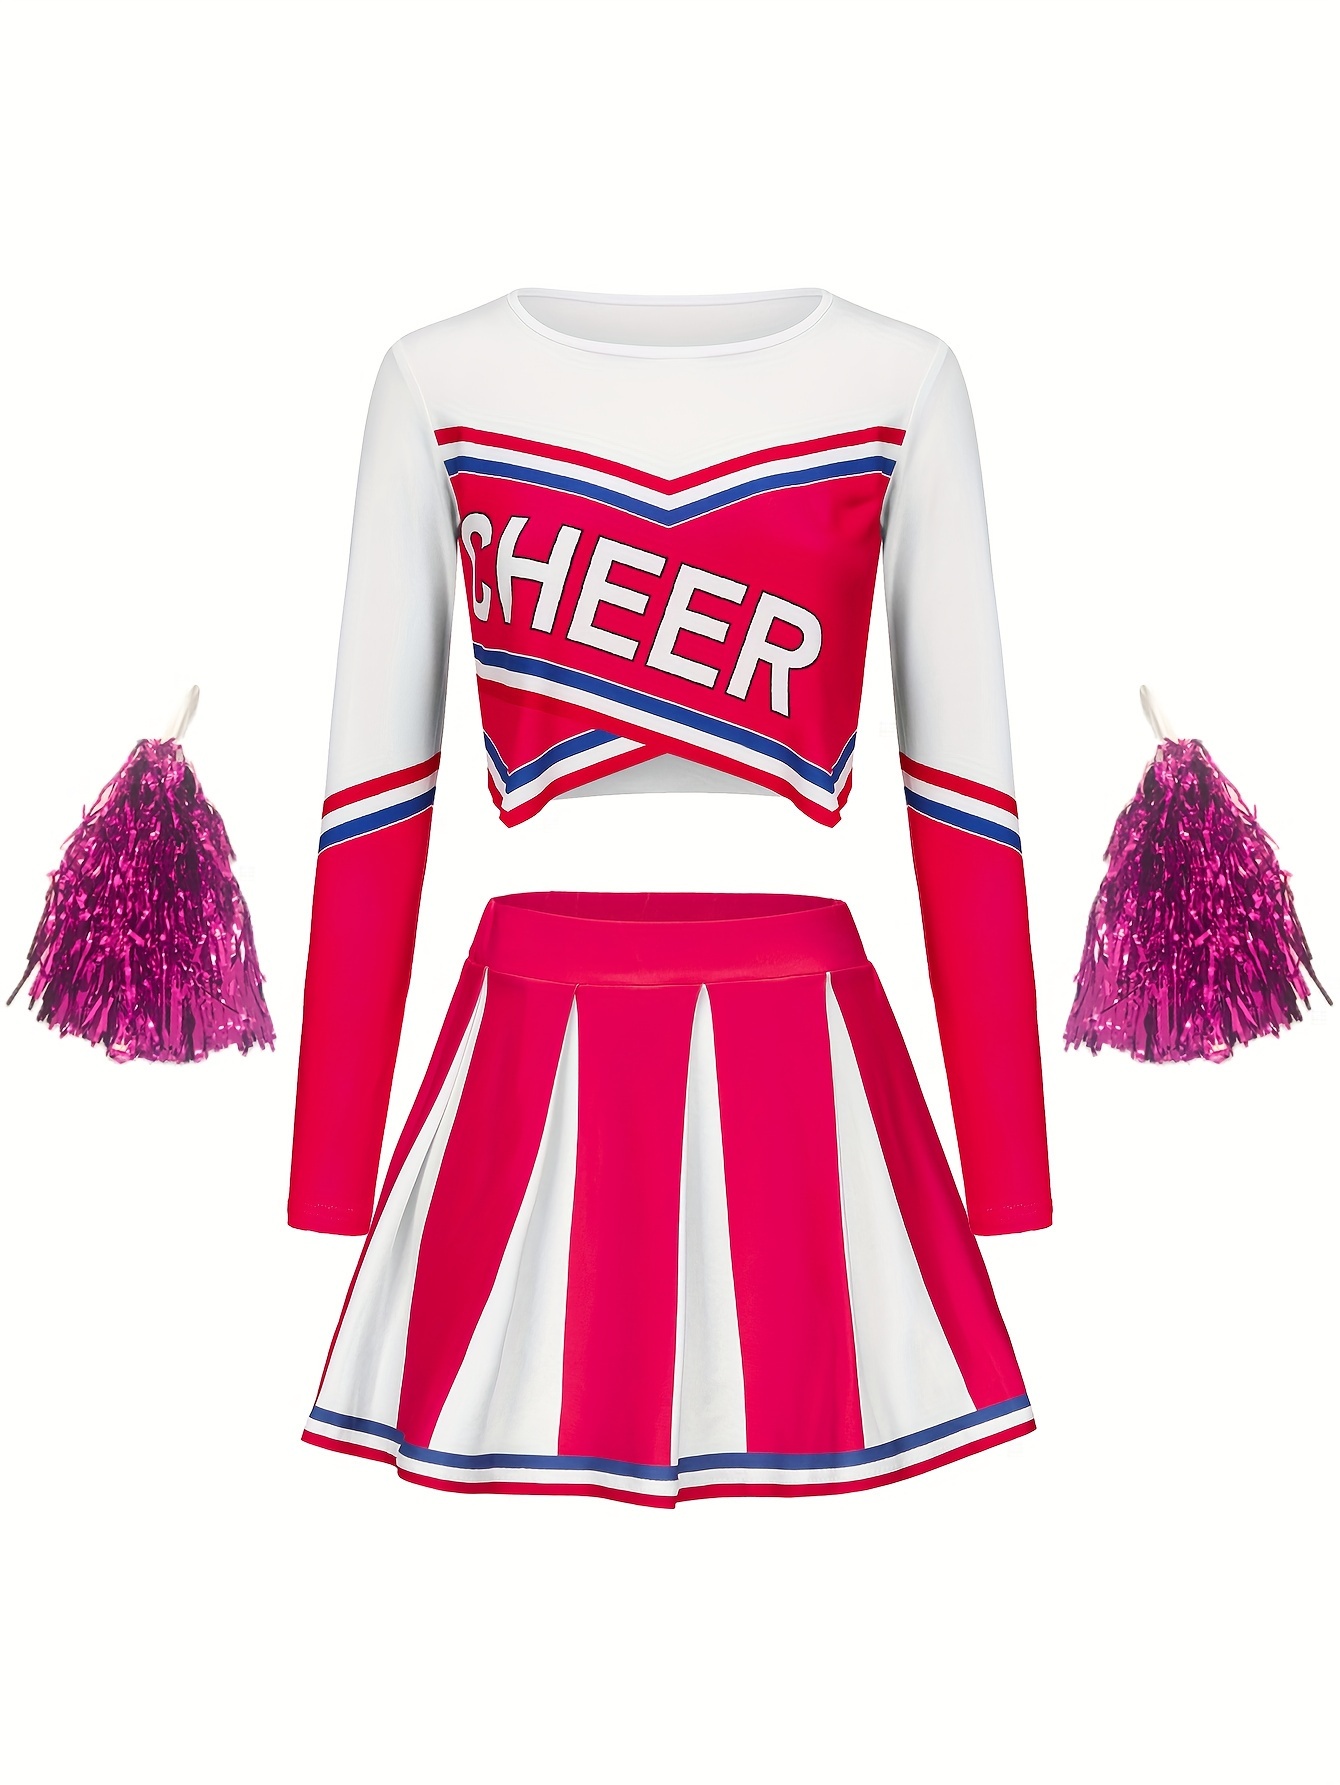 CHEER COMPETITION UNIFORM - Level 2 - SKIRT - $35 -> MUST refer to